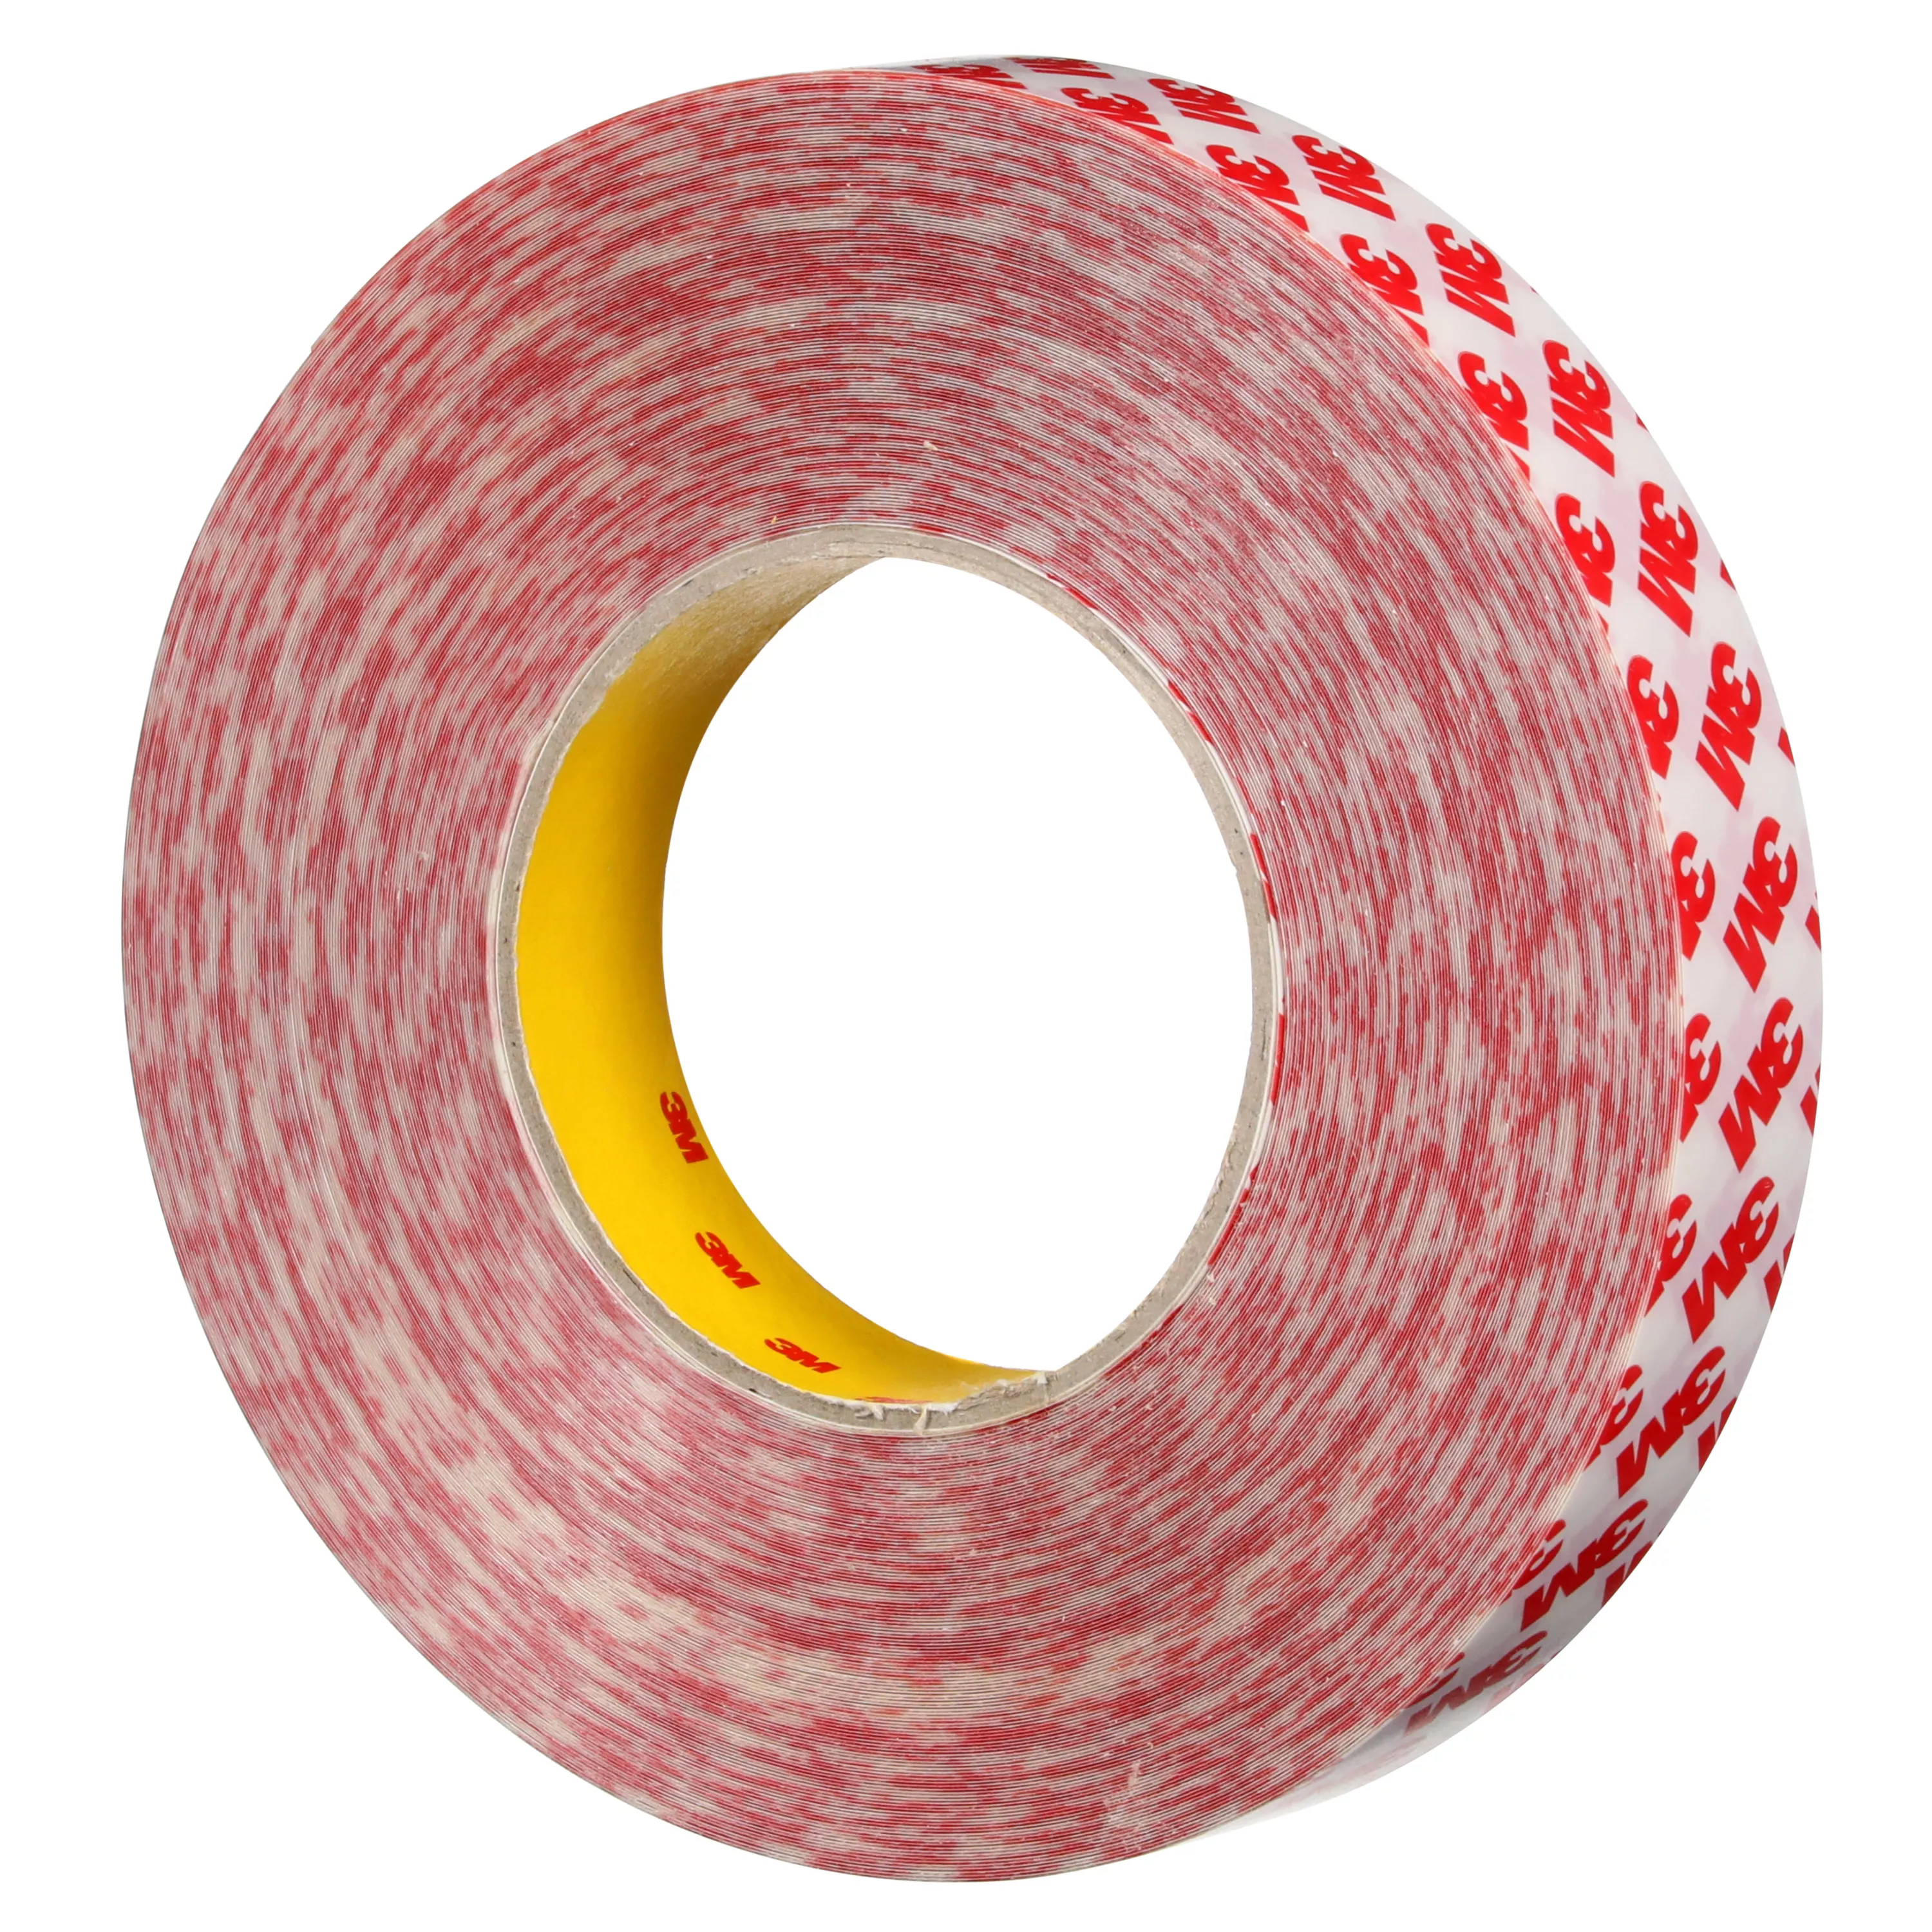 Product Number GPT-020F | 3M™ Double Coated Tape GPT-020F